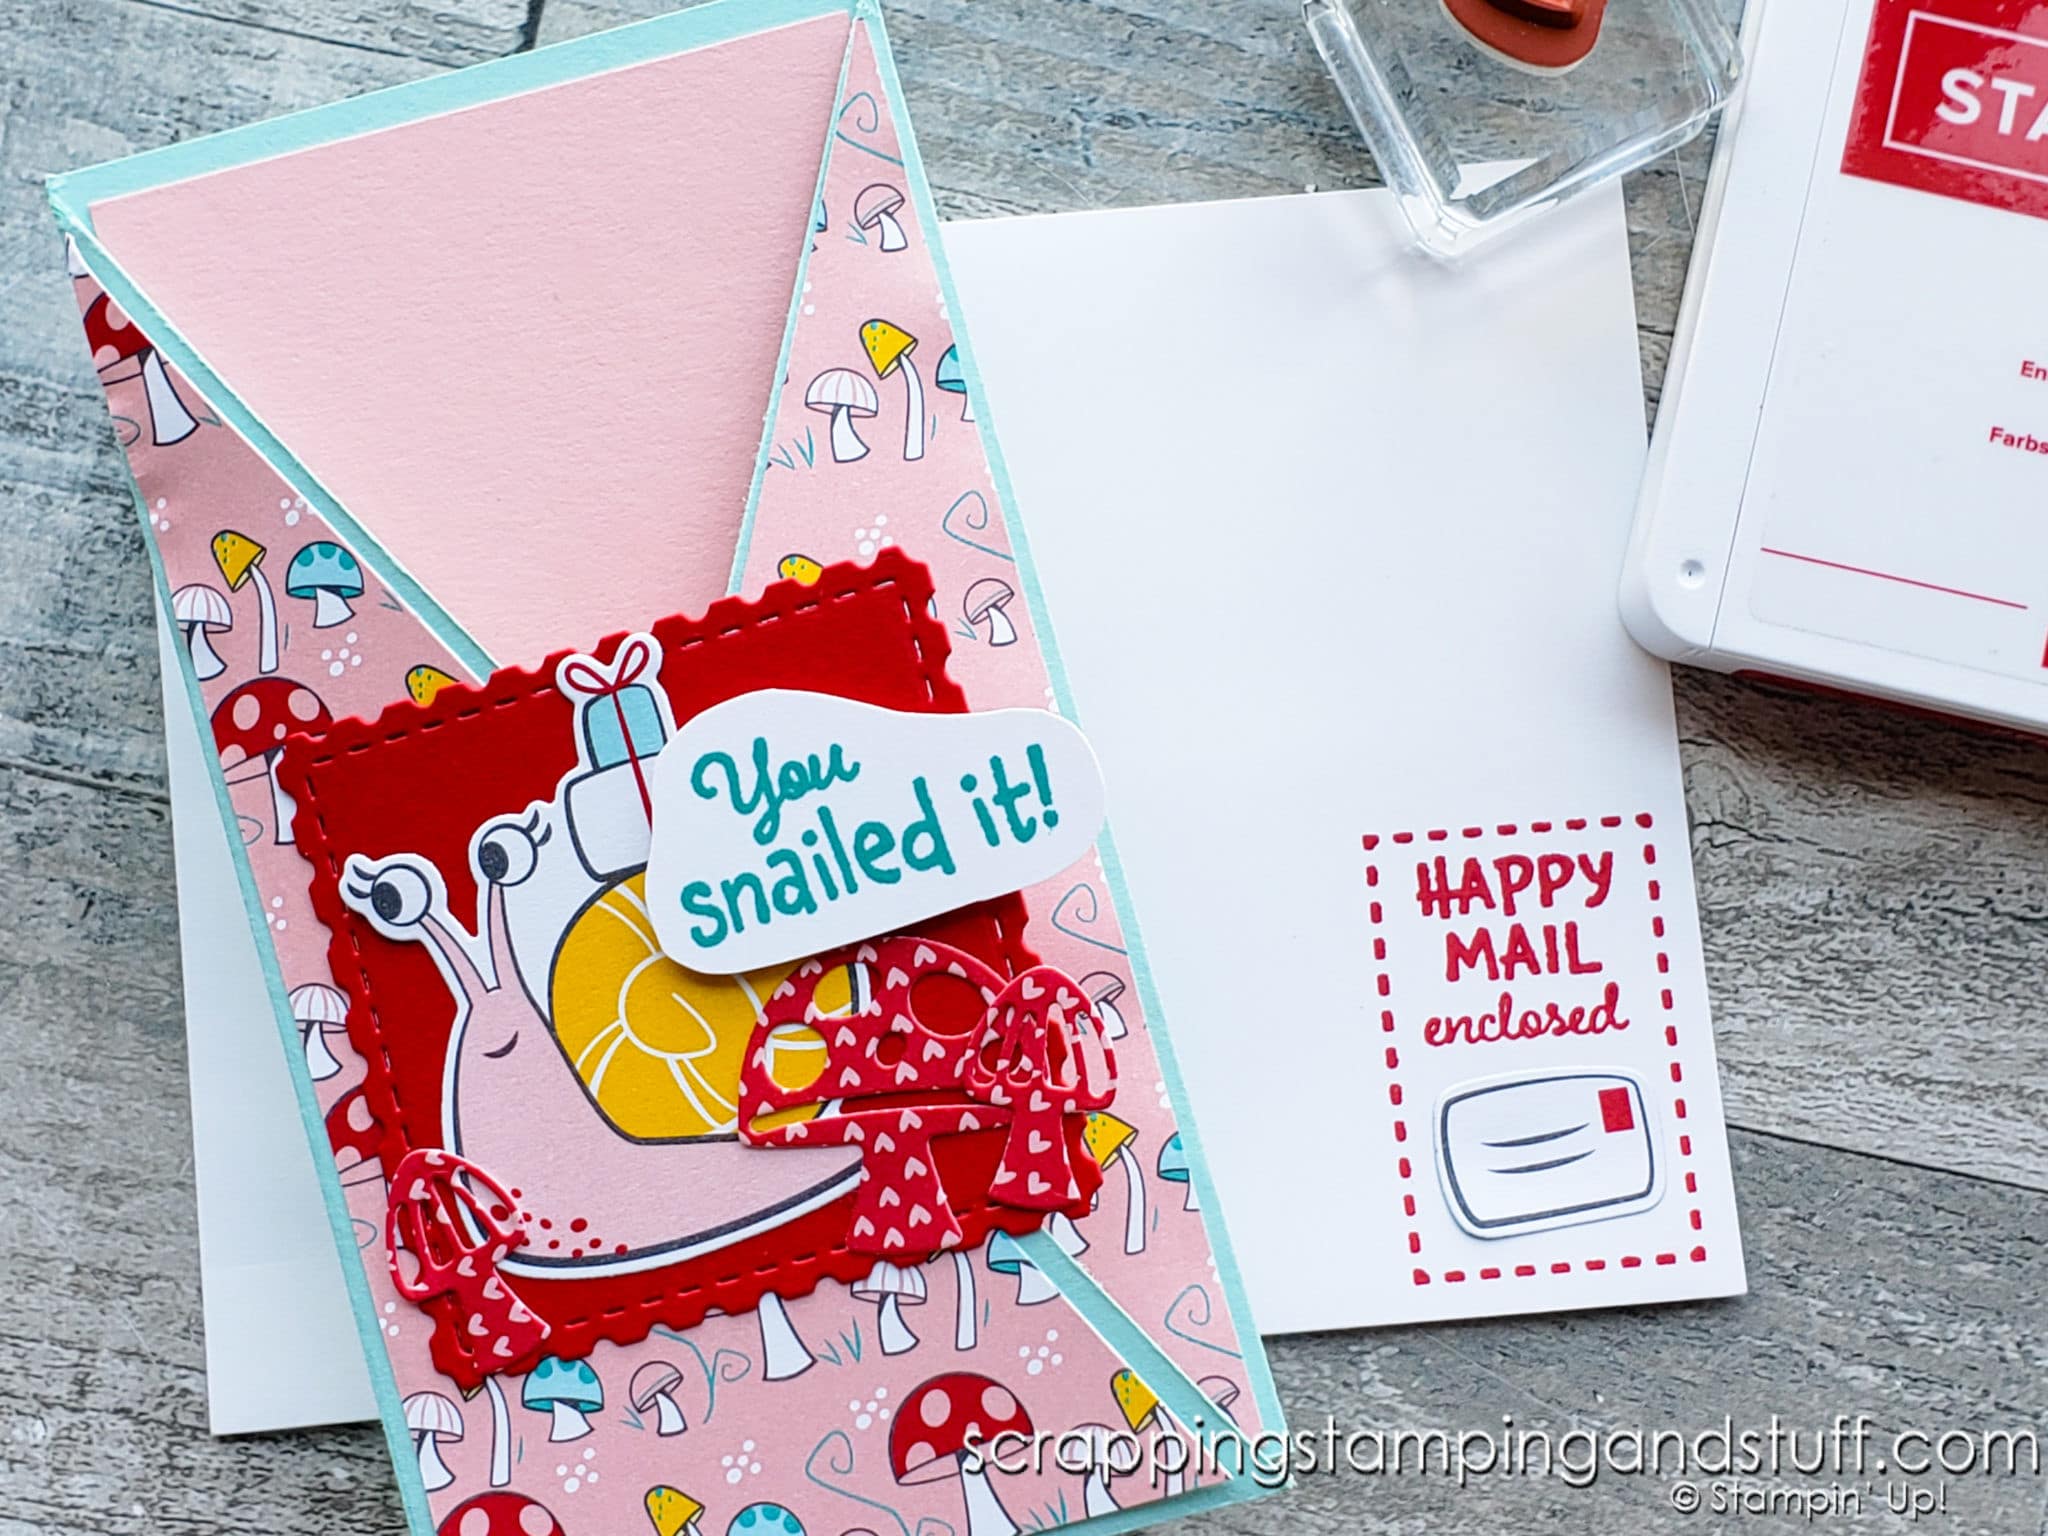 Adorable Snailed It Fun Fold Card With Hidden Message Inside!